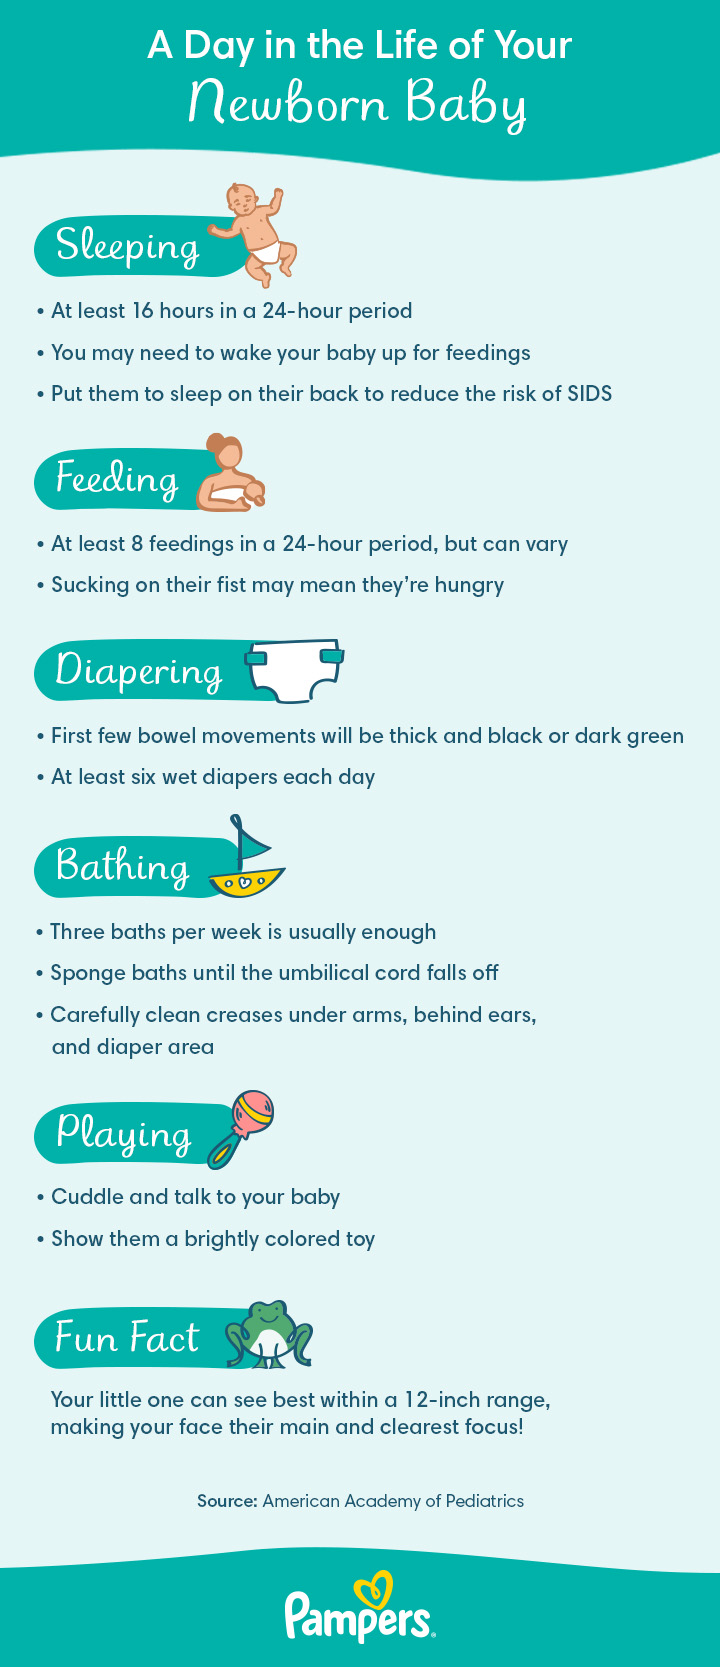 Your newborn's first weeks: what to expect